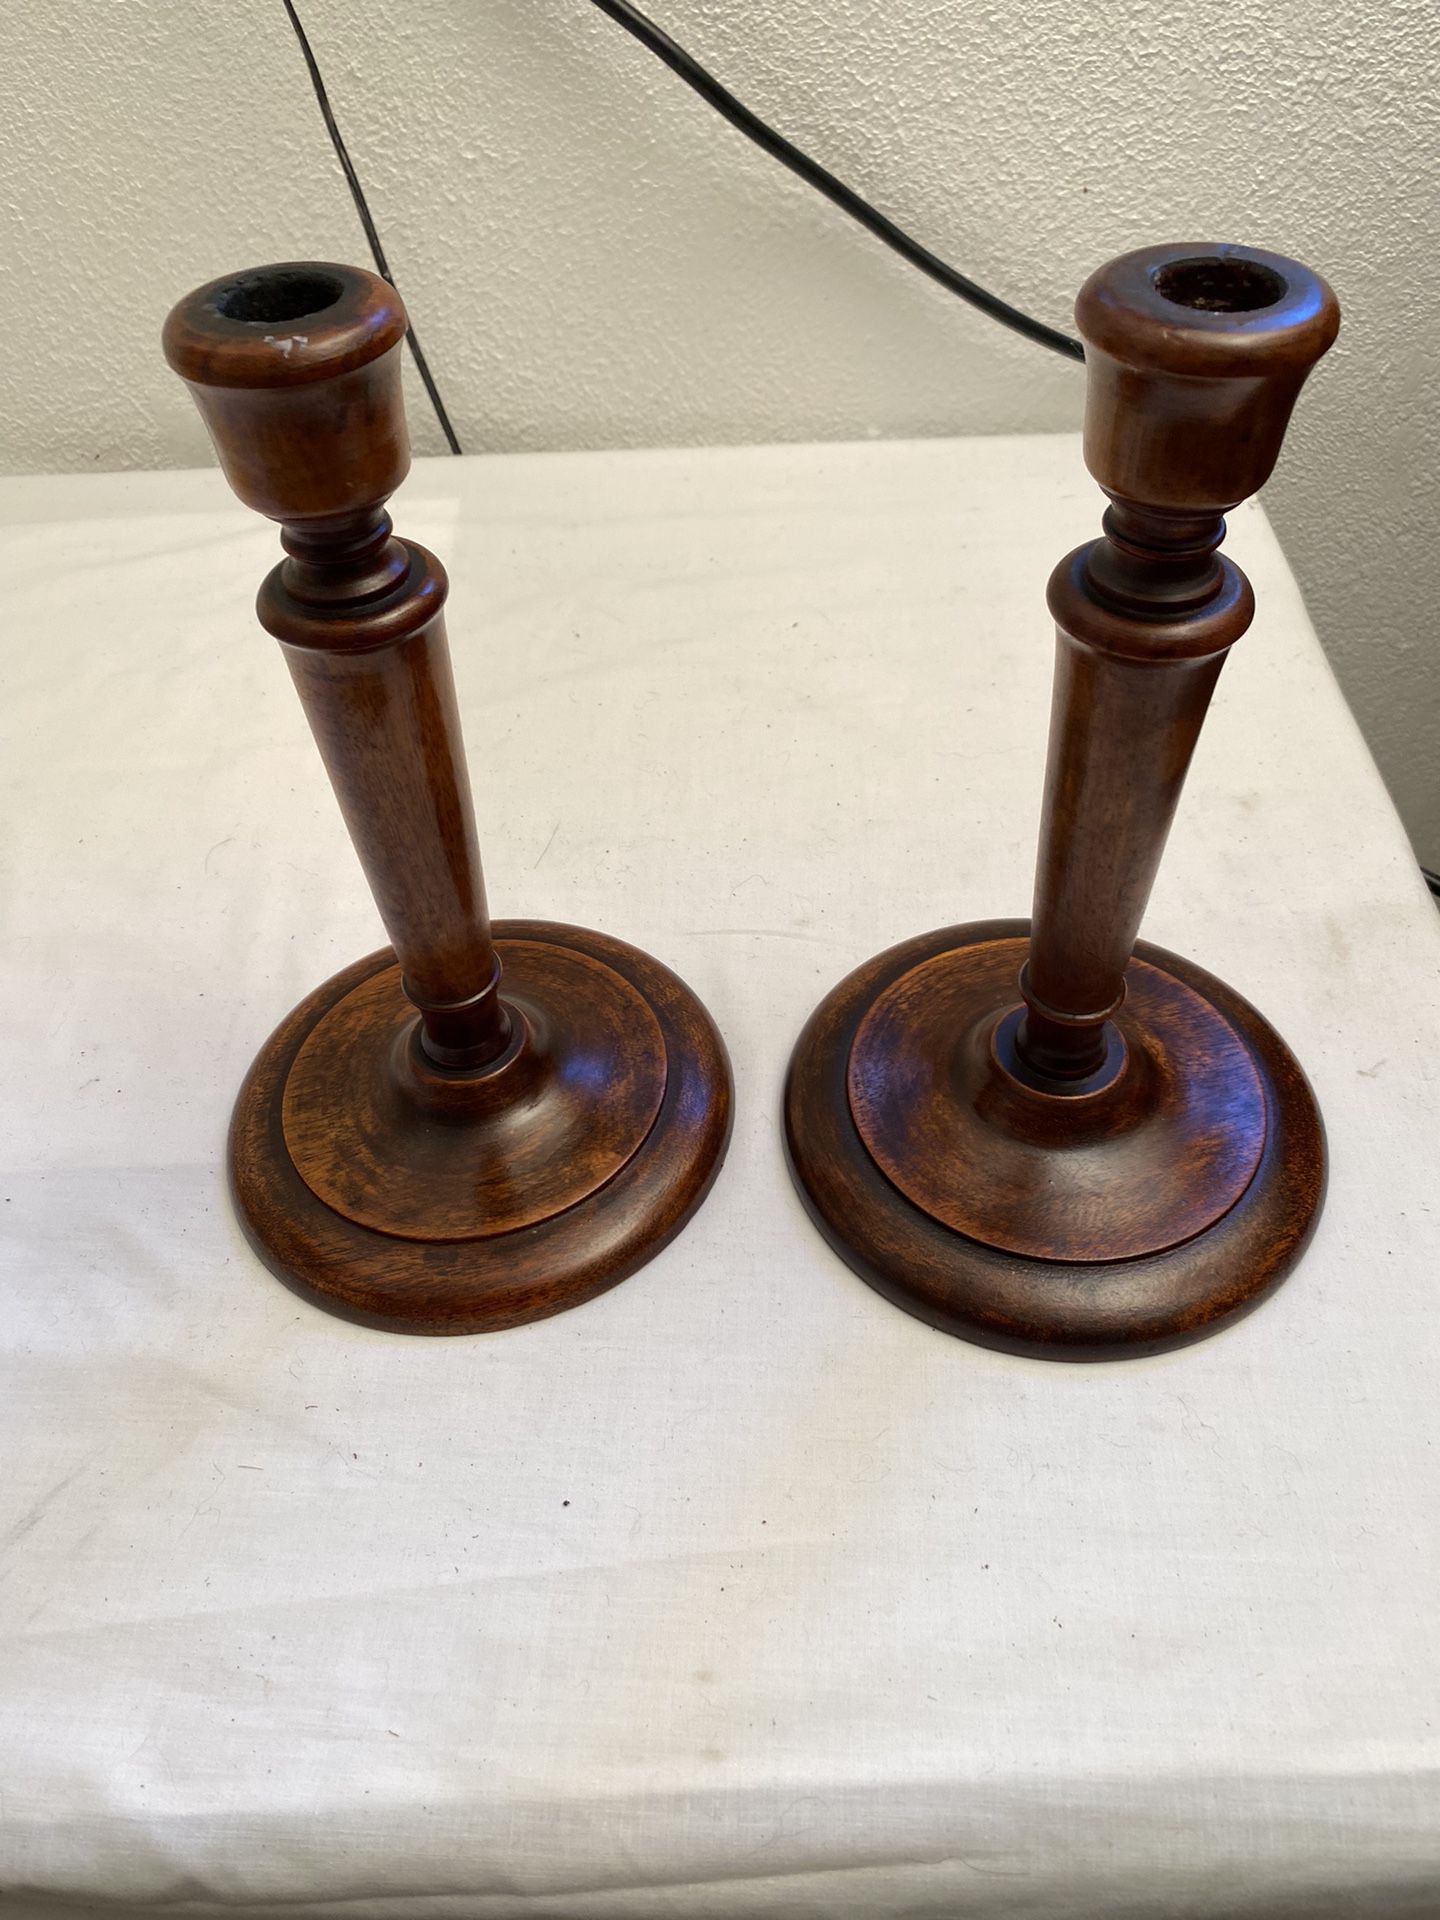 2 Antique Wooden Candle Holders (1929)